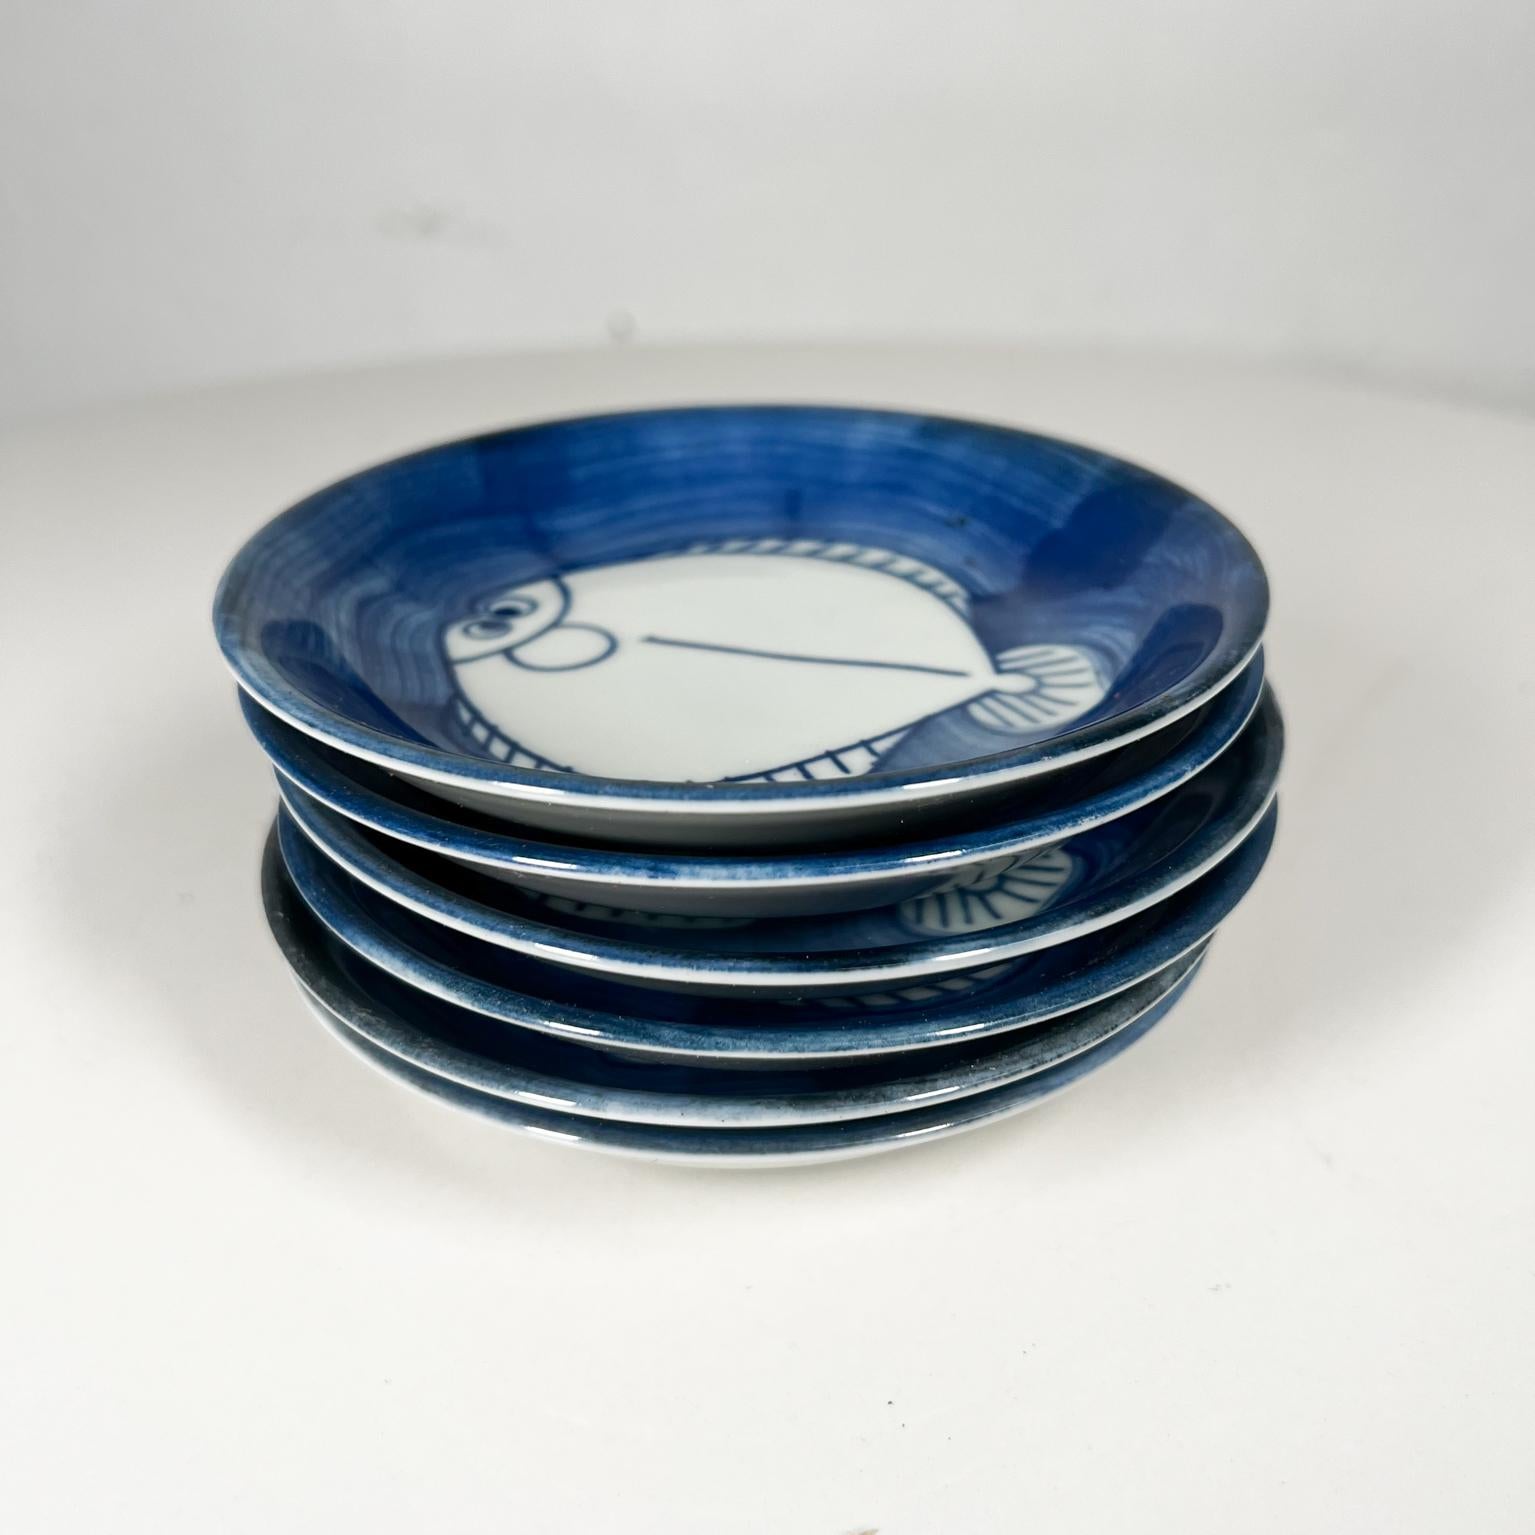 Modern Painted Blue and White Snack Plates Set of 6 Japan
Decorative Fish design on plates.
4.63 diameter x .75 tall
Some are stamped Made in Japan.
Unrestored vintage condition.
Review images listed please.

